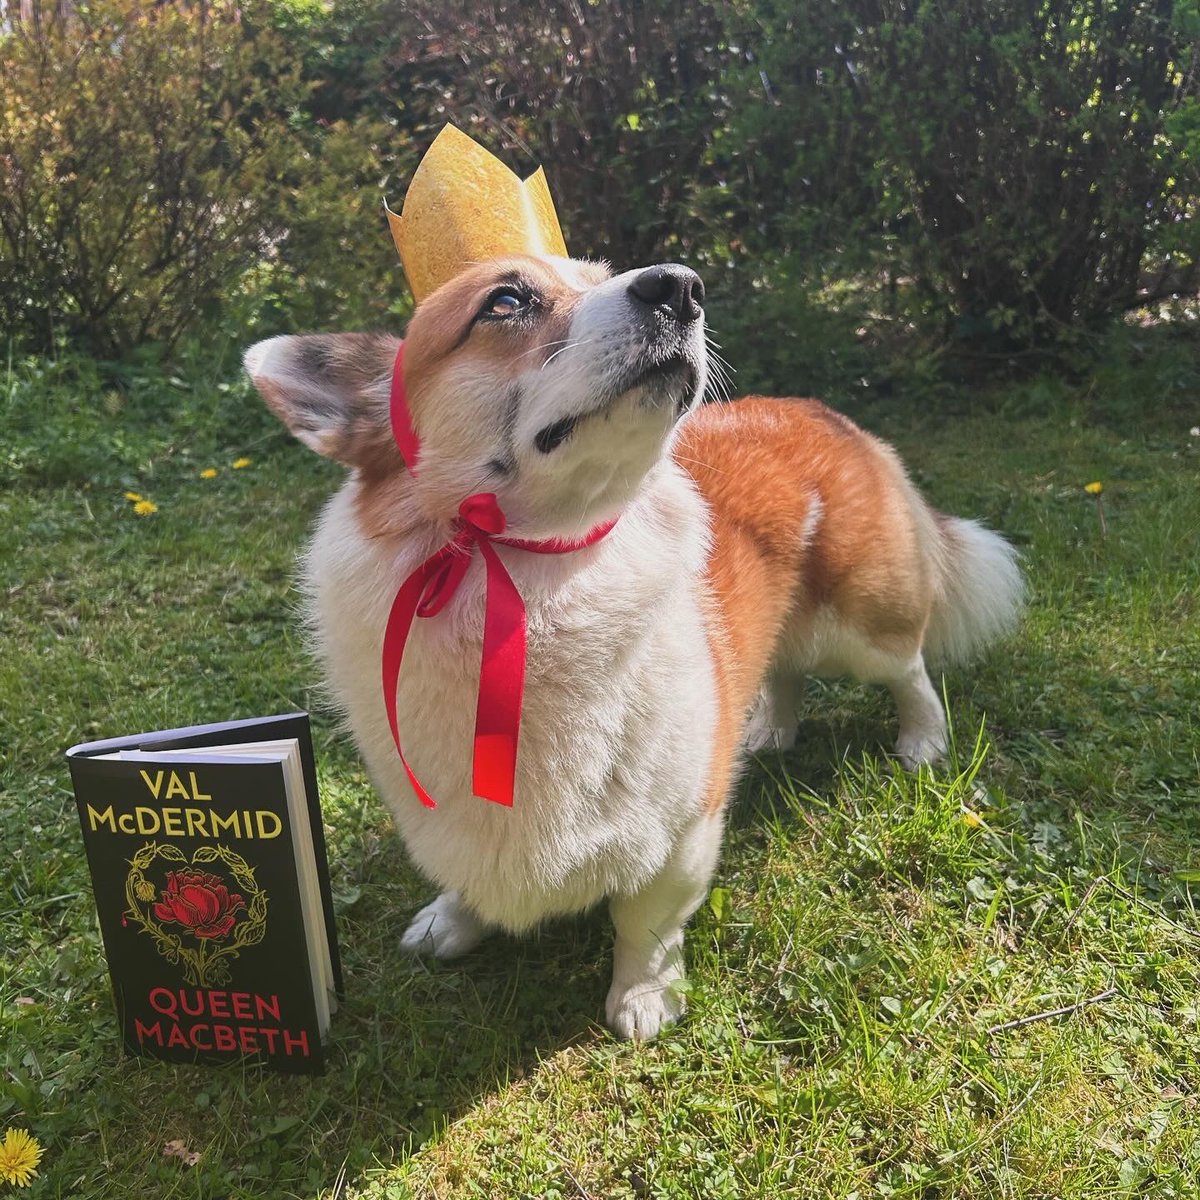 Henry the corgi is royally excited about Queen Macbeth! 🐾👑 Have you picked up your copy of this brilliant historical novel by @valmcdermid yet? An instant Indie Fiction Bestseller, this is a remarkable retelling of a story you may think you know.